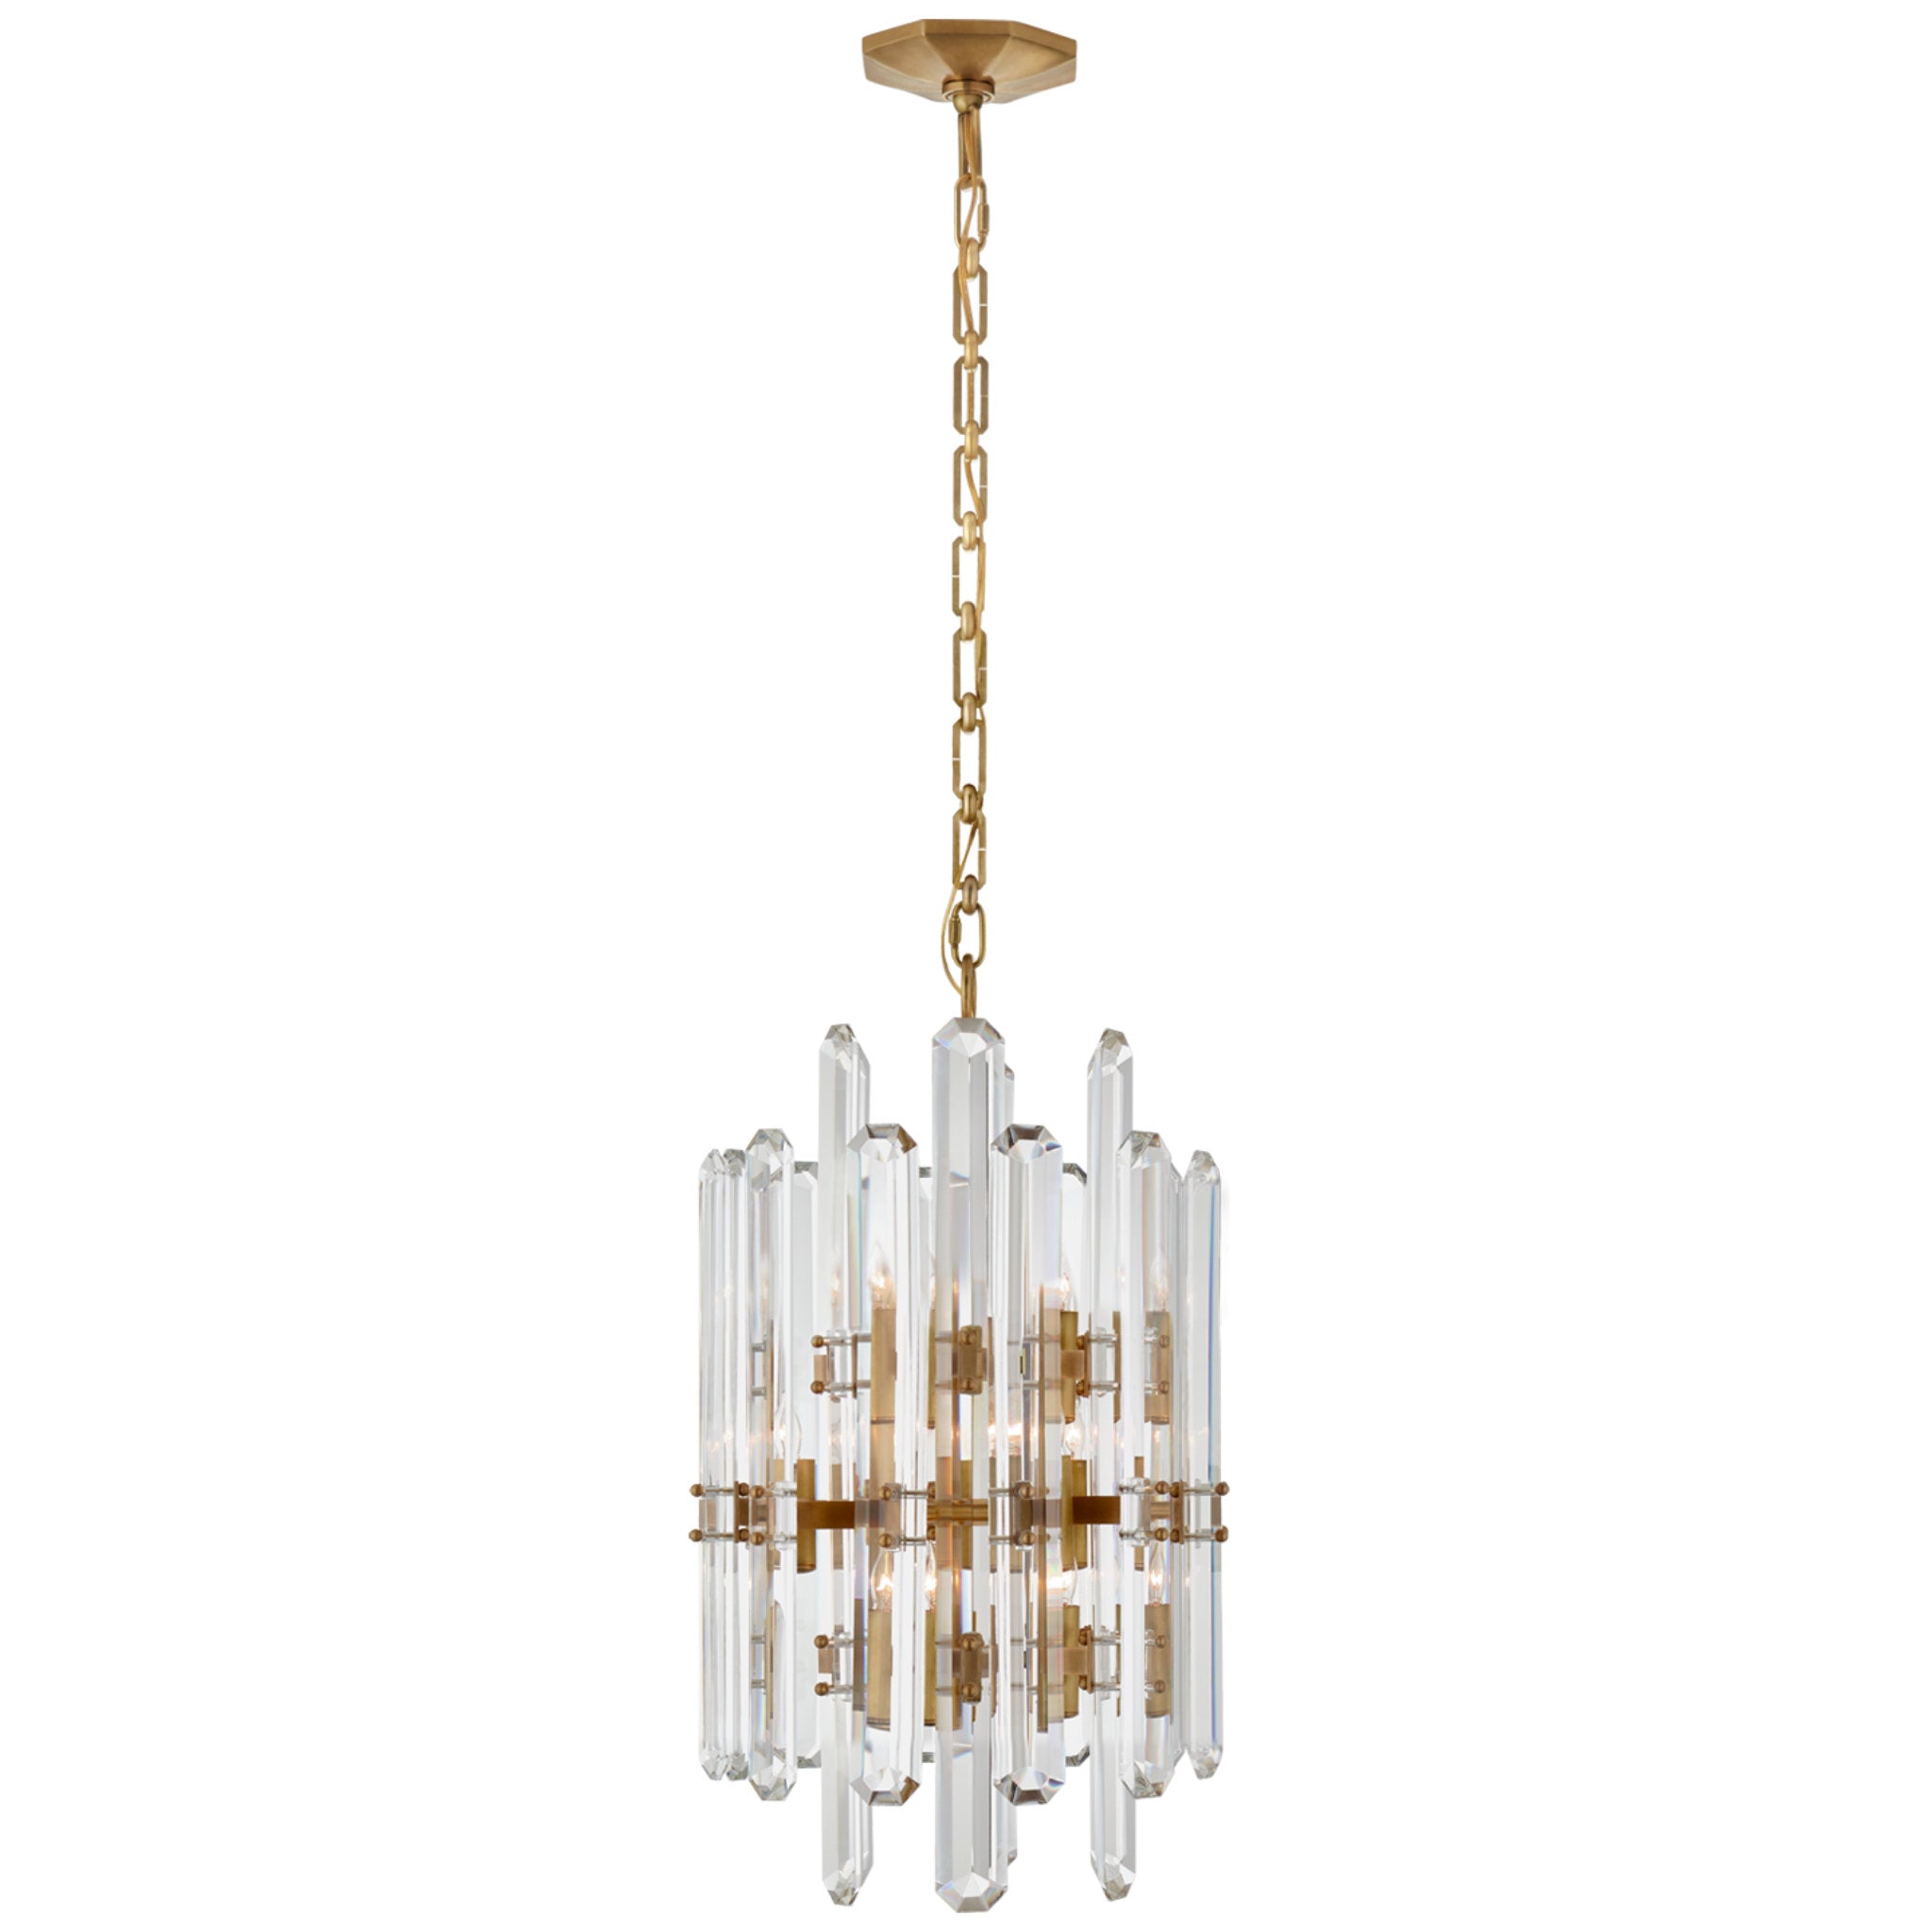 Ambrois Model #VC20K7 Thirteen Light Chandelier in Hand-Rubbed Antique —  Quality Discount Lighting